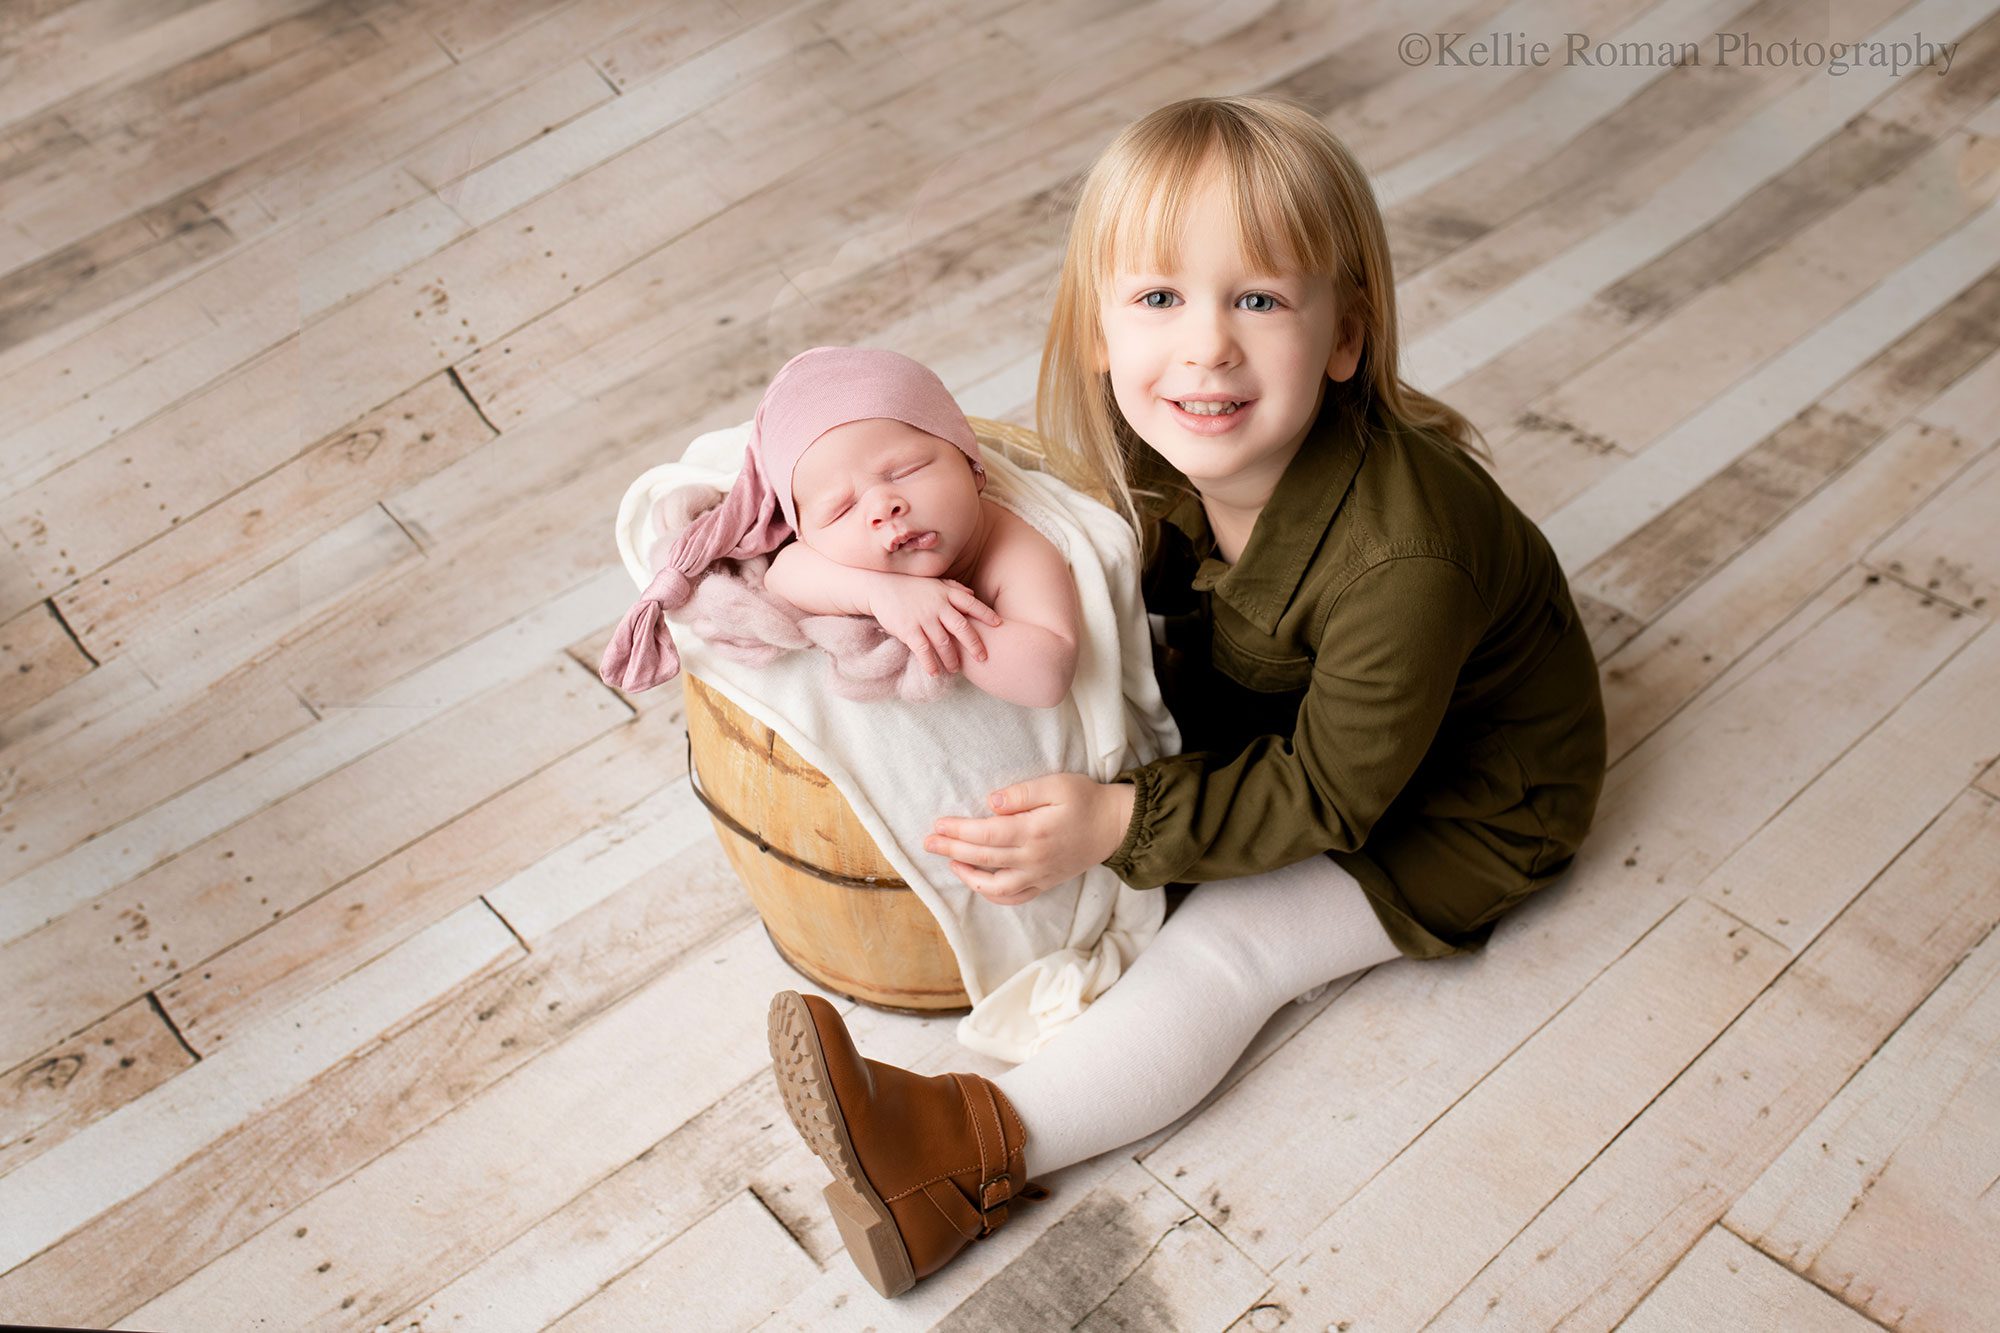 milwaukee newborn photography studio. toddler girl is sitting on floor next to wood bucket that her newborn sister is sleeping in. newborn has chin resting on arms, and a purple sleepy cap on. toddler girl has olive green dress and blonde hair. she is smiling.